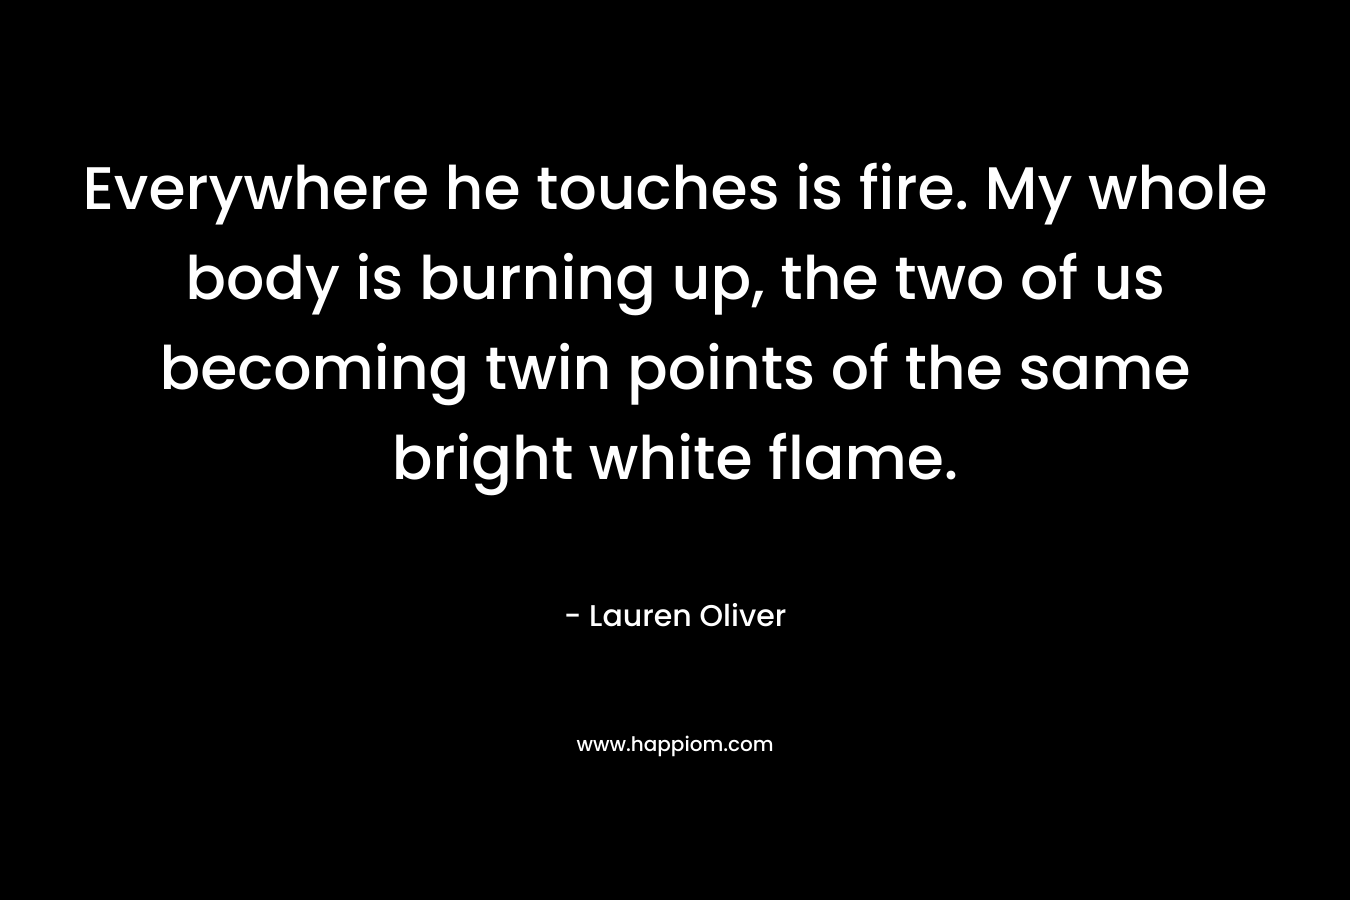 Everywhere he touches is fire. My whole body is burning up, the two of us becoming twin points of the same bright white flame. – Lauren Oliver